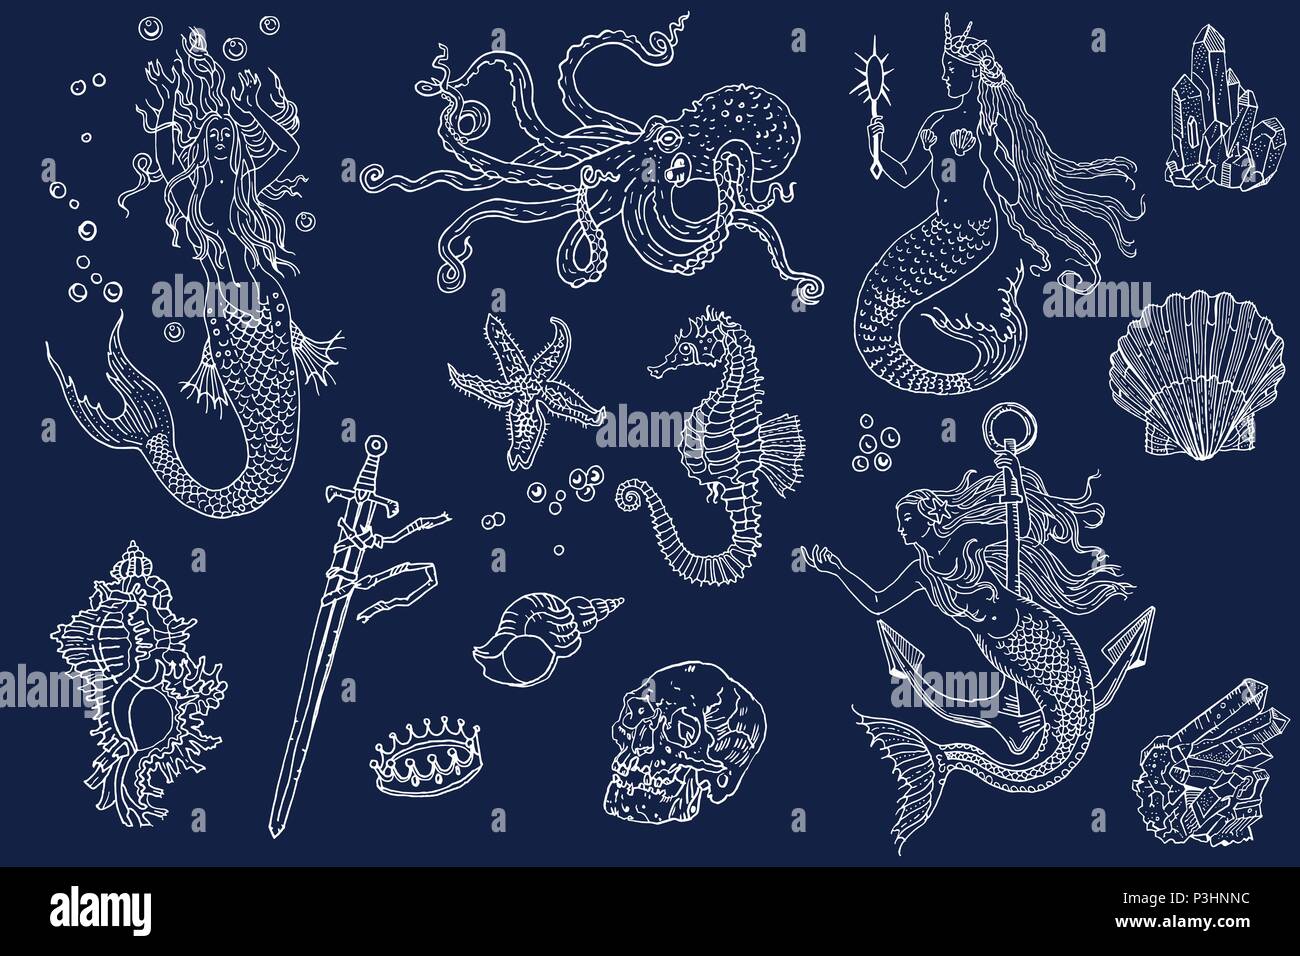 Vintage fantasy nautical set long haired mermaid, underwater treasures, octopus, shell, starfish, anchor, drowned sword, crown, skull, crystal, sea horse. Hand drawn vector illustration white on blue. Stock Vector